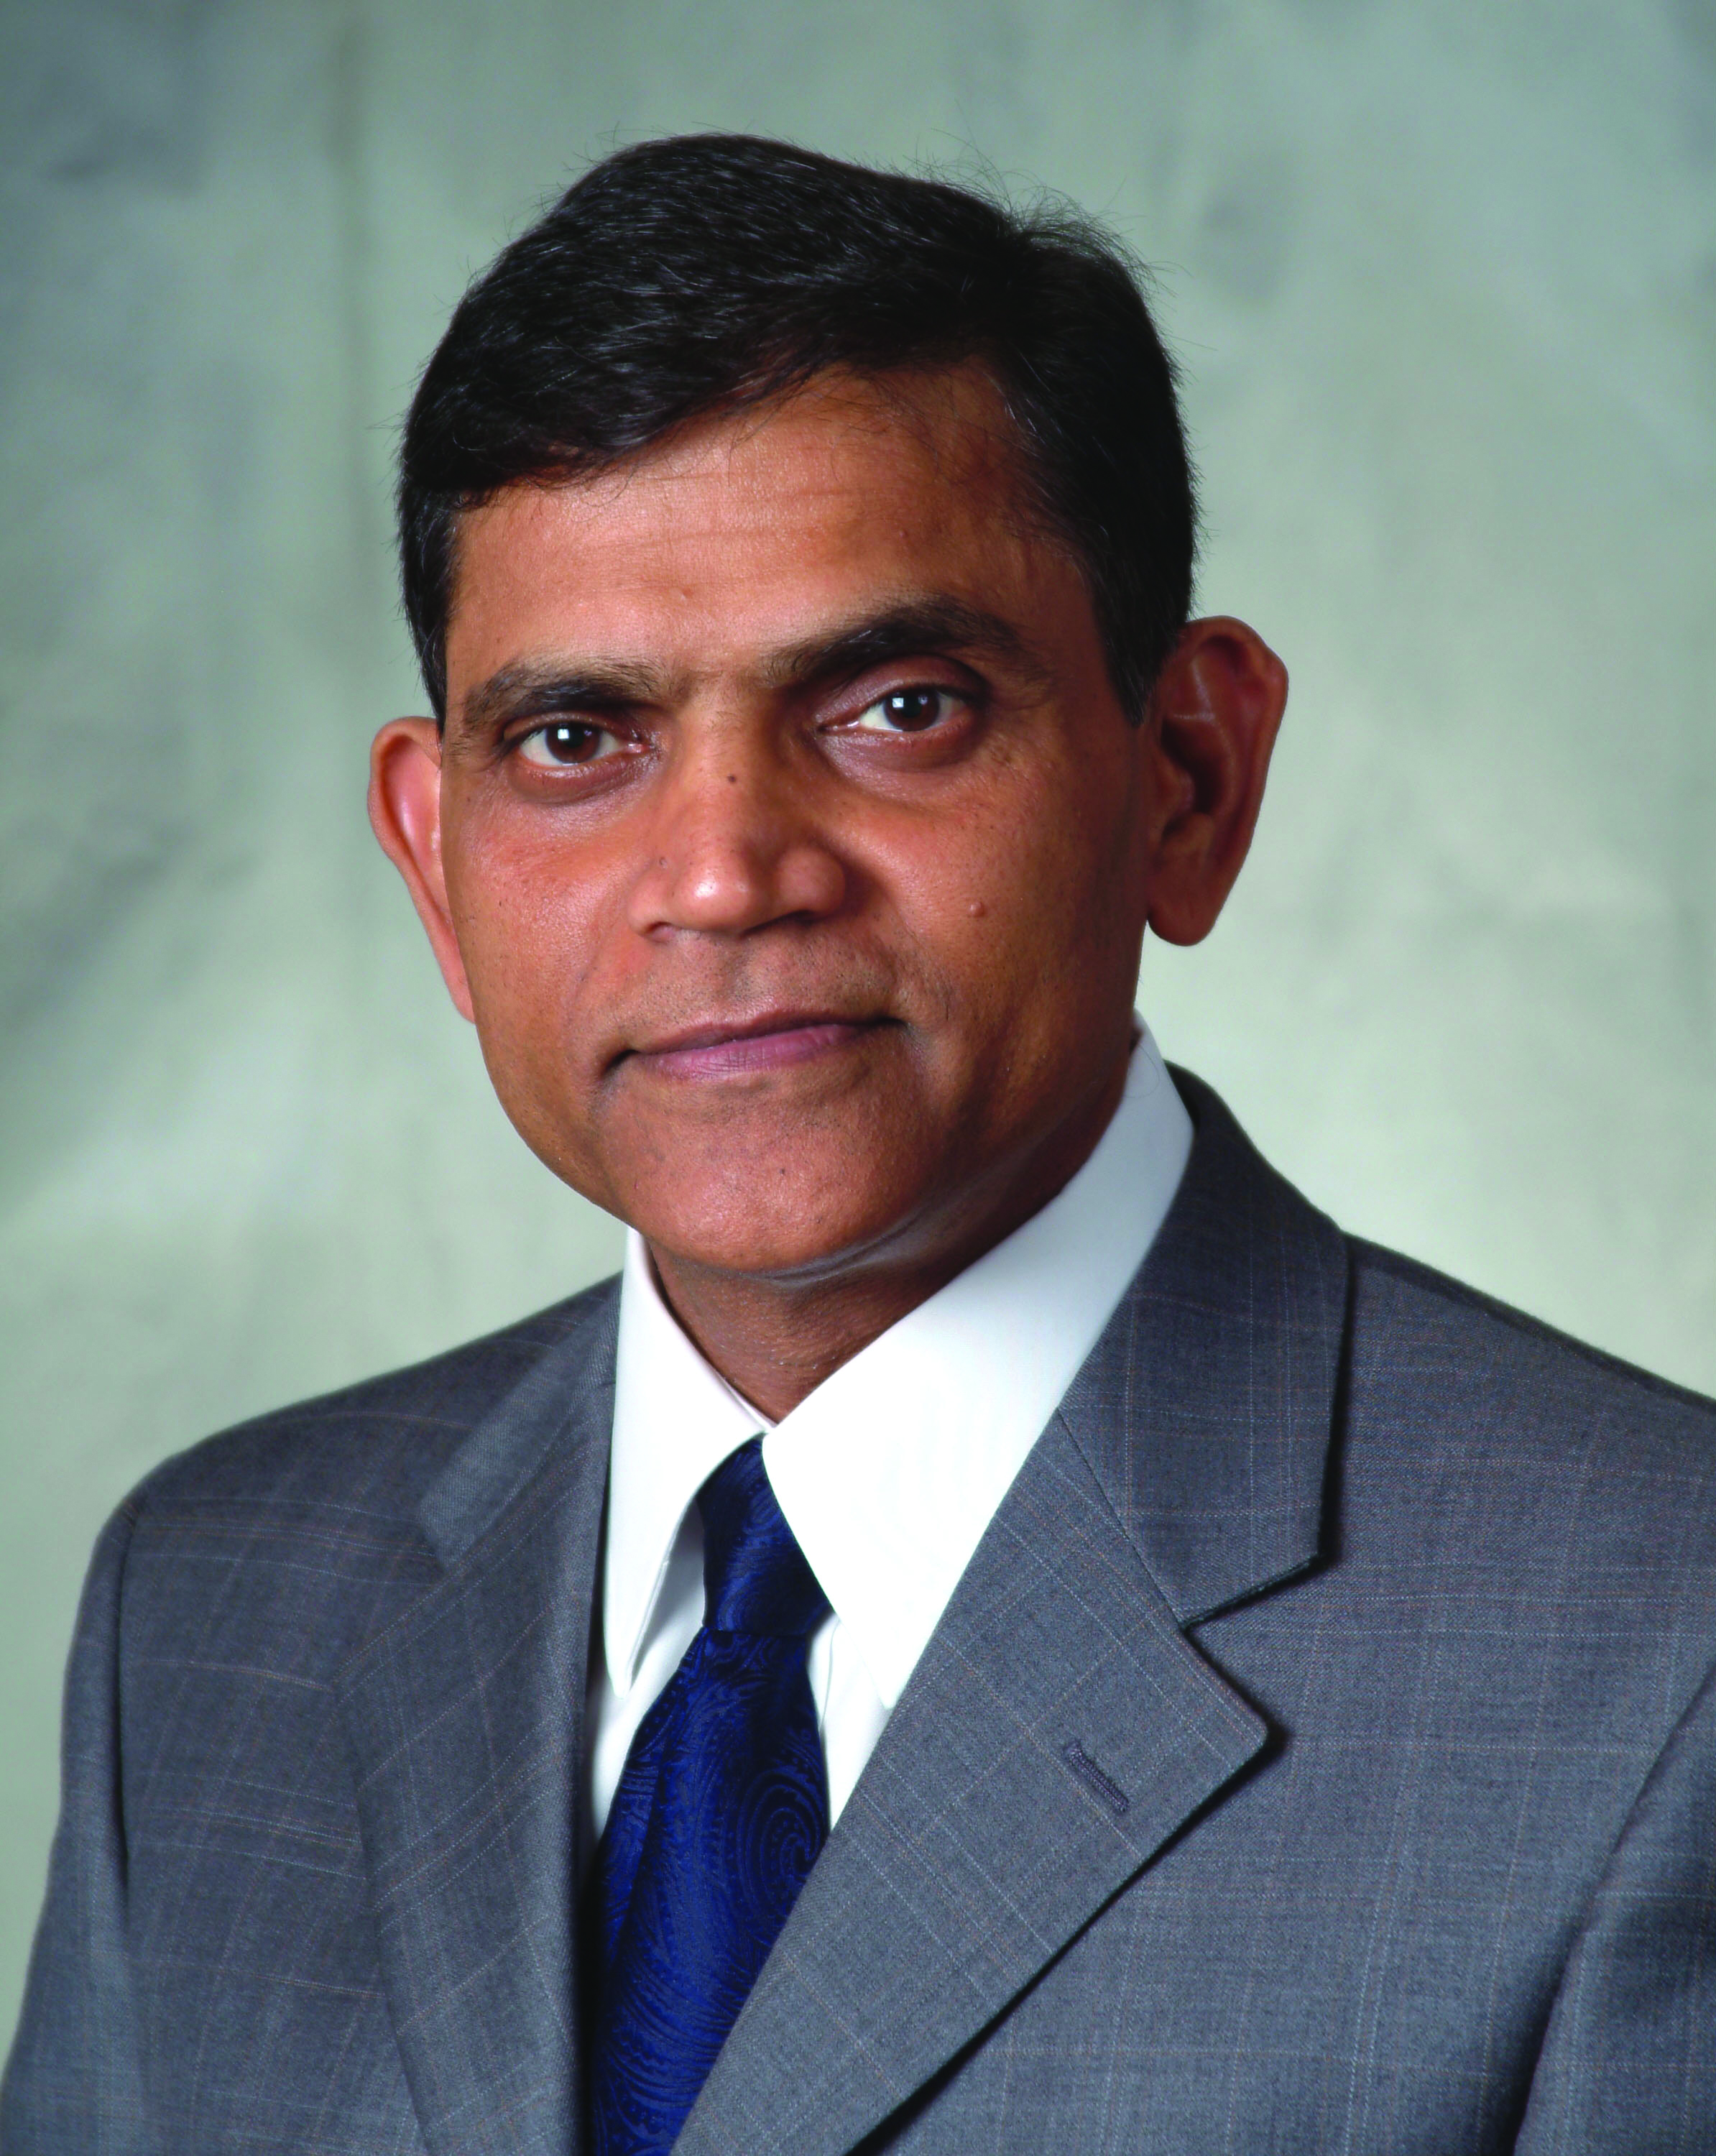 Janaki Alavalapati wearing a gray suite, blue tie, and white shirt